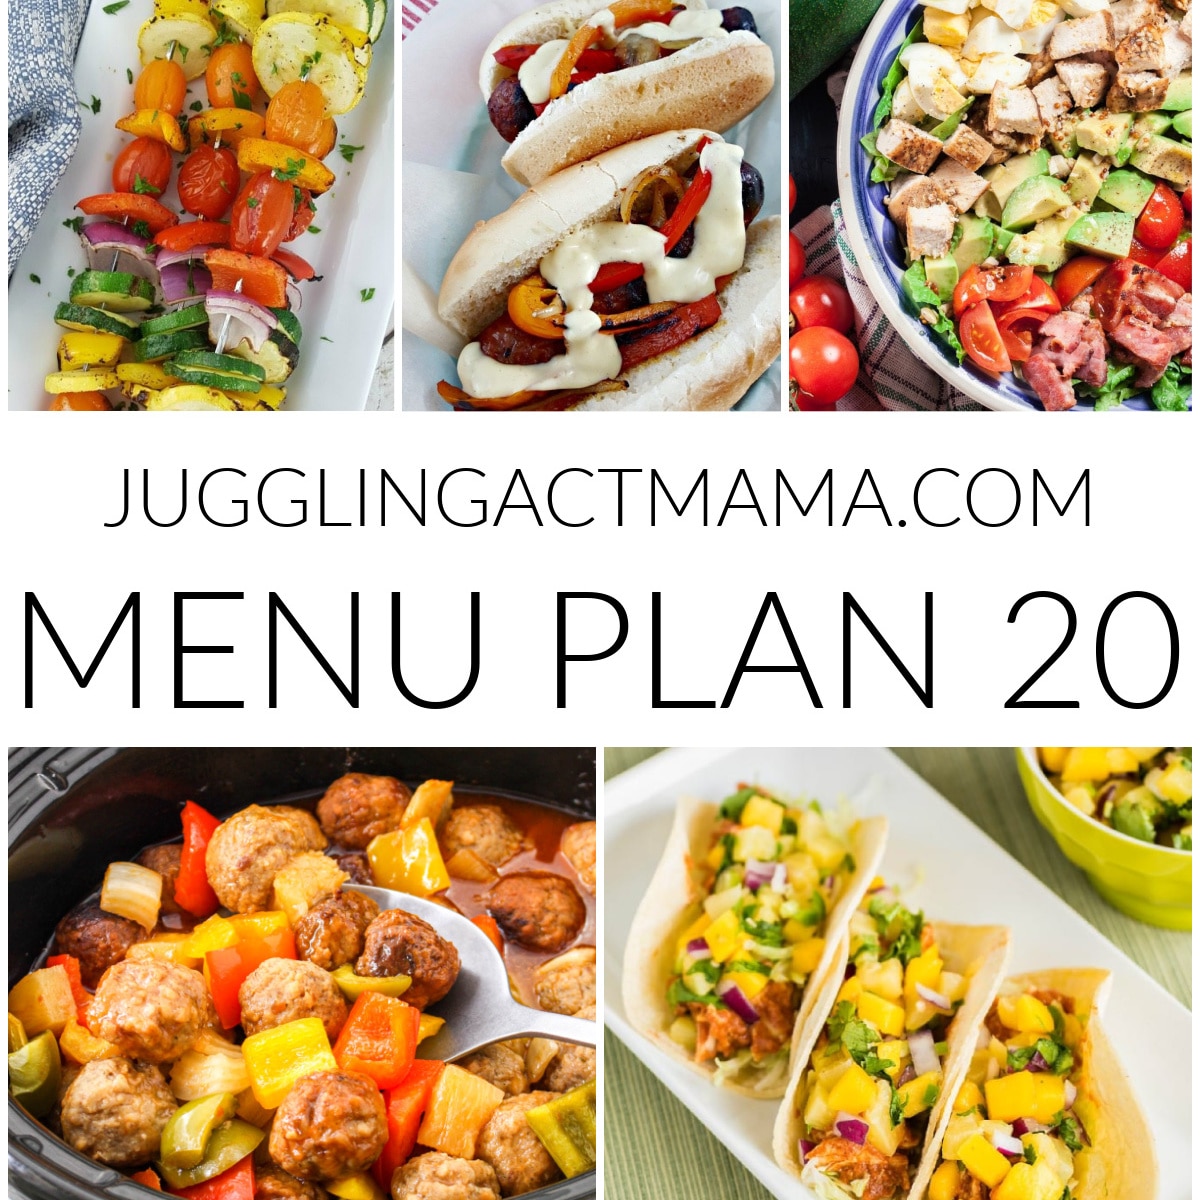 Meal Plan 20 square collage image with text overlay.